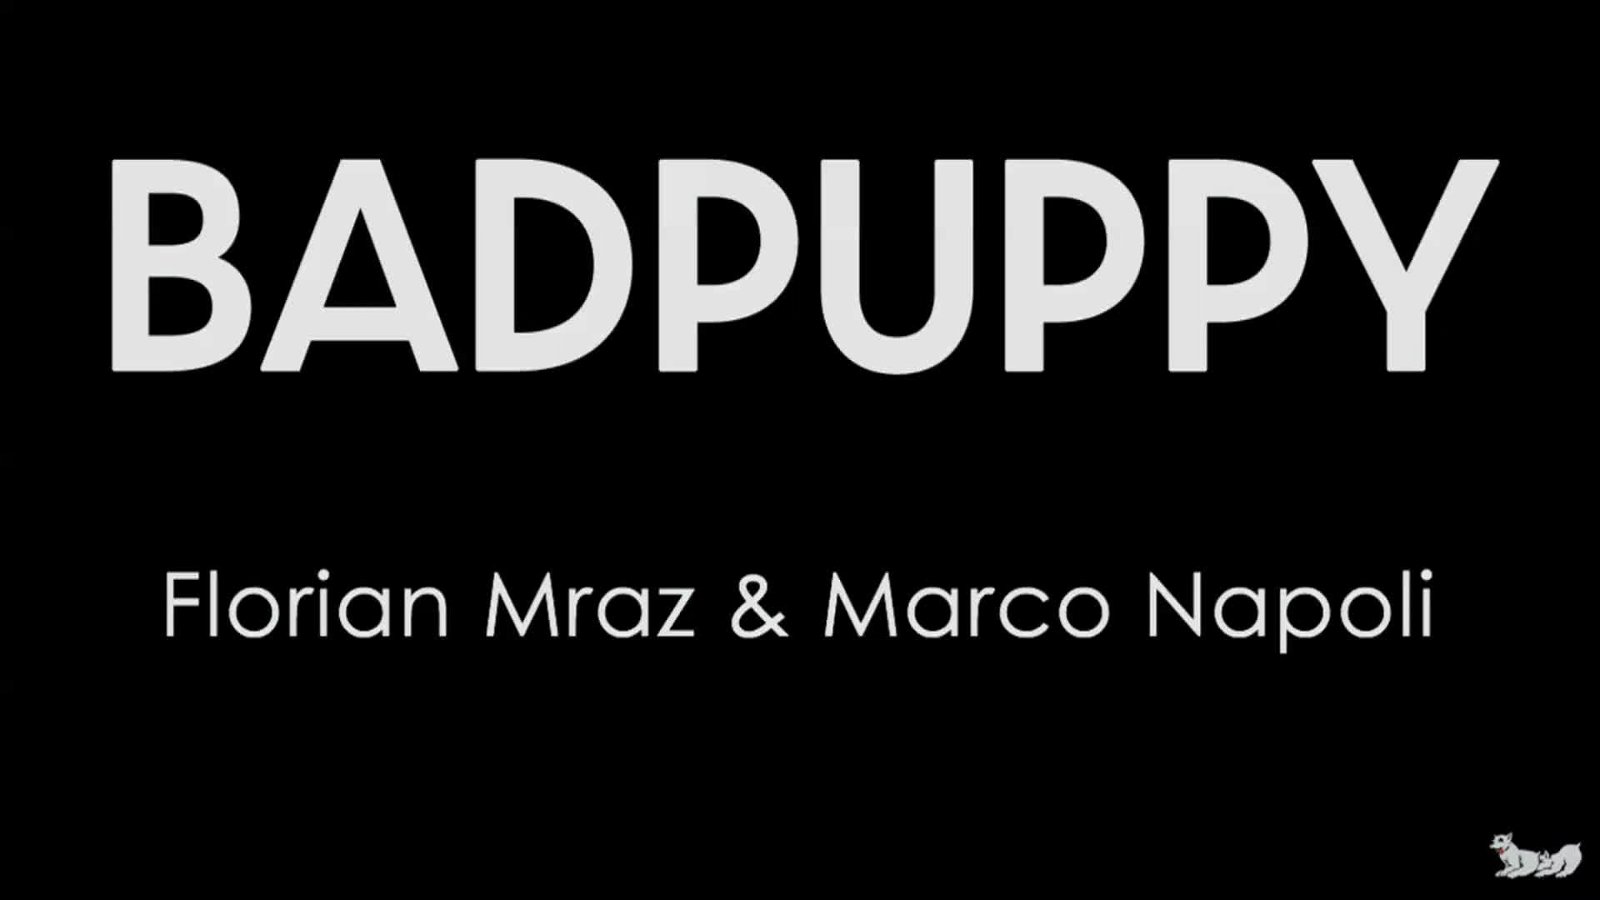 Video by BadpuppyOfficial with the username @BadpuppyOfficial, who is a brand user,  May 1, 2024 at 12:58 PM. The post is about the topic Gay Porn and the text says 'Florian goes down on Marco, bobbing up and down on Marco's uncut sausage
https://www.badpuppy.com/tour/trailers/Marco-Napoli-and-Florian-Mraz.html
#fitlads #gayfit #gay #gaytwinks #muscles #twink #hunk #jock #bareback #uncut'